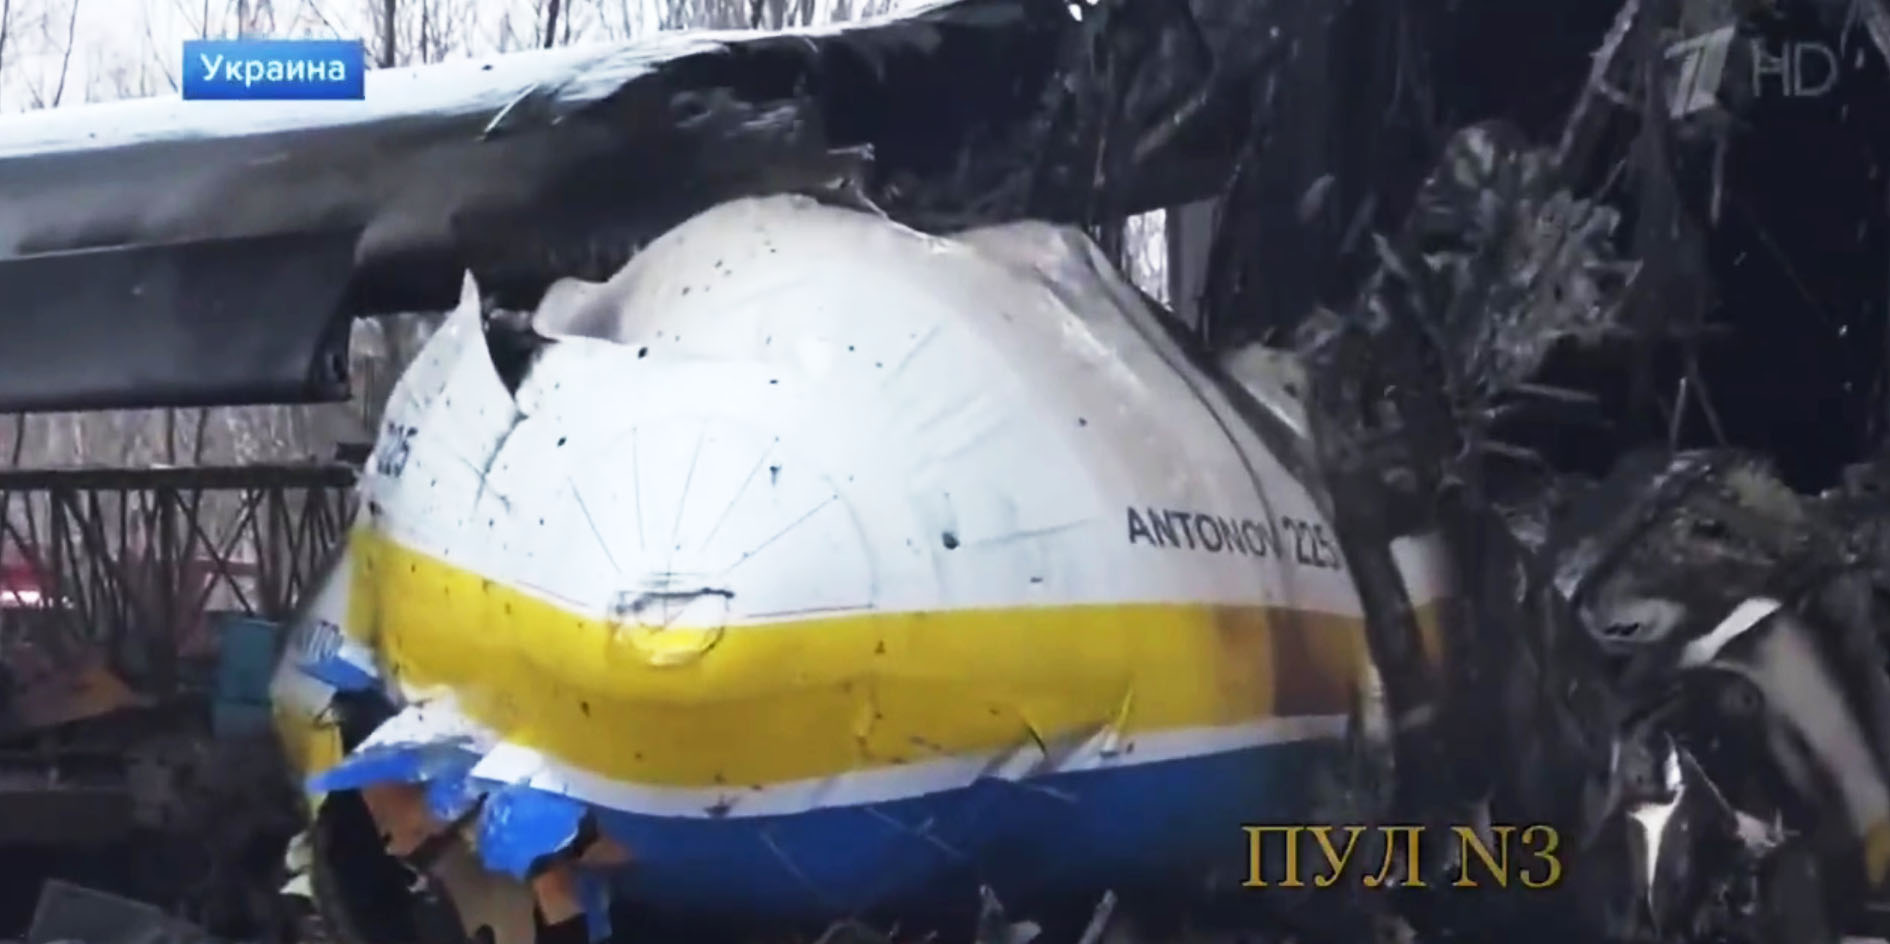 BREAKING New footage shows the Antonov An-225 Mriya has been completely destroyed at Gostomel airport - AIRLIVE